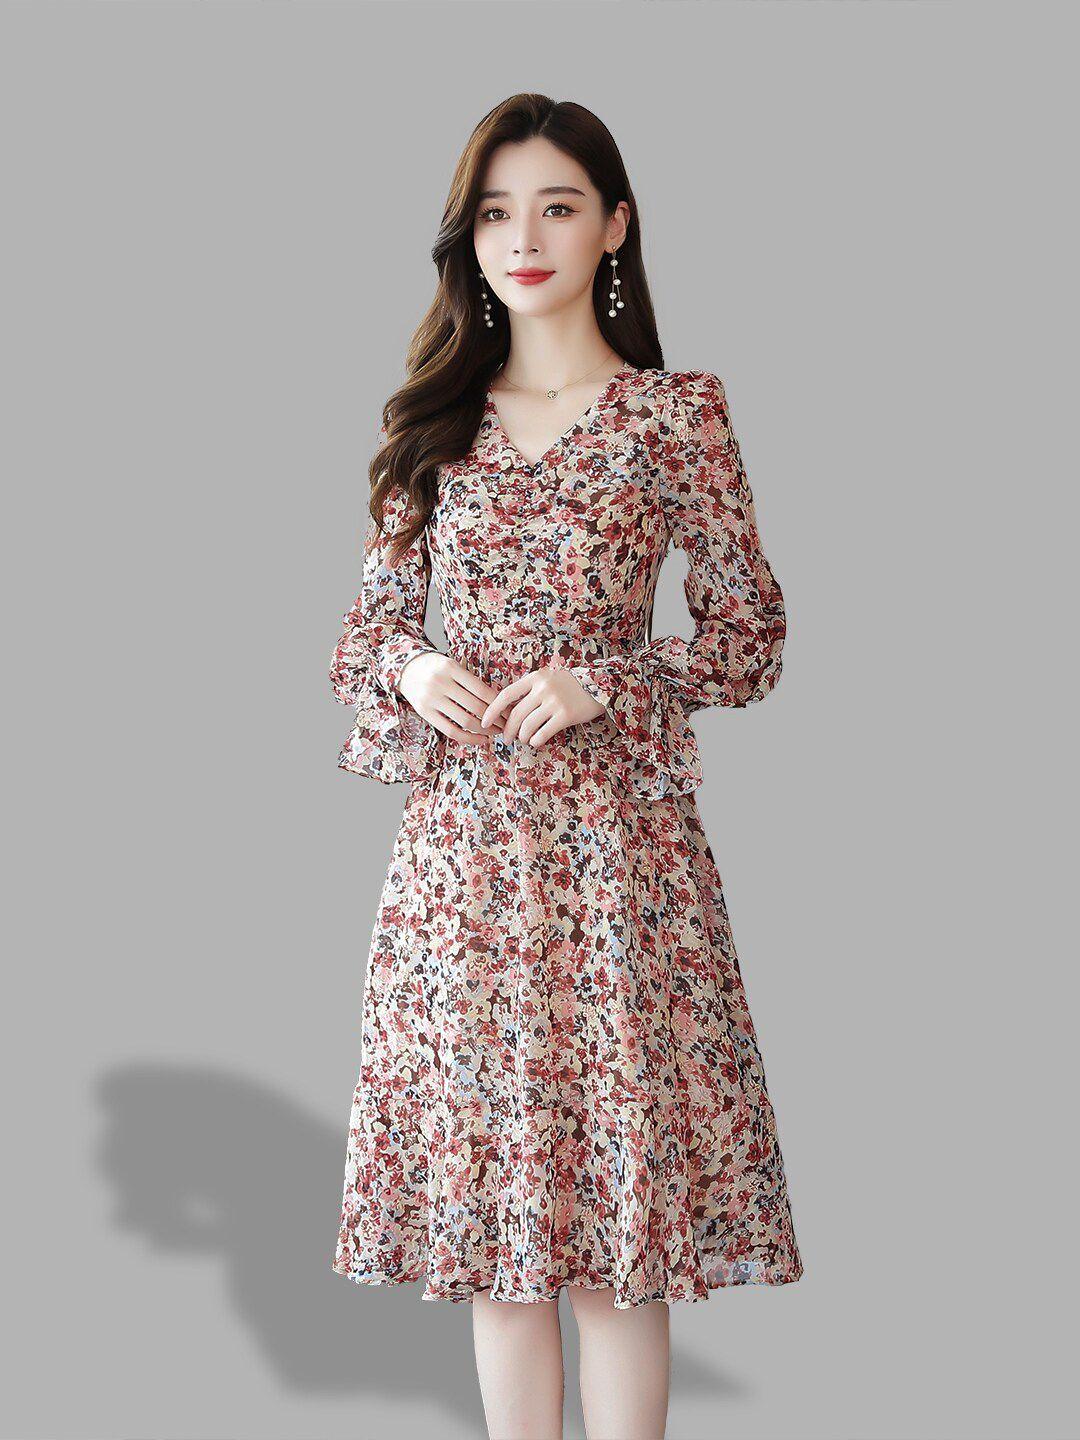 jc-collection-pink-floral-dress